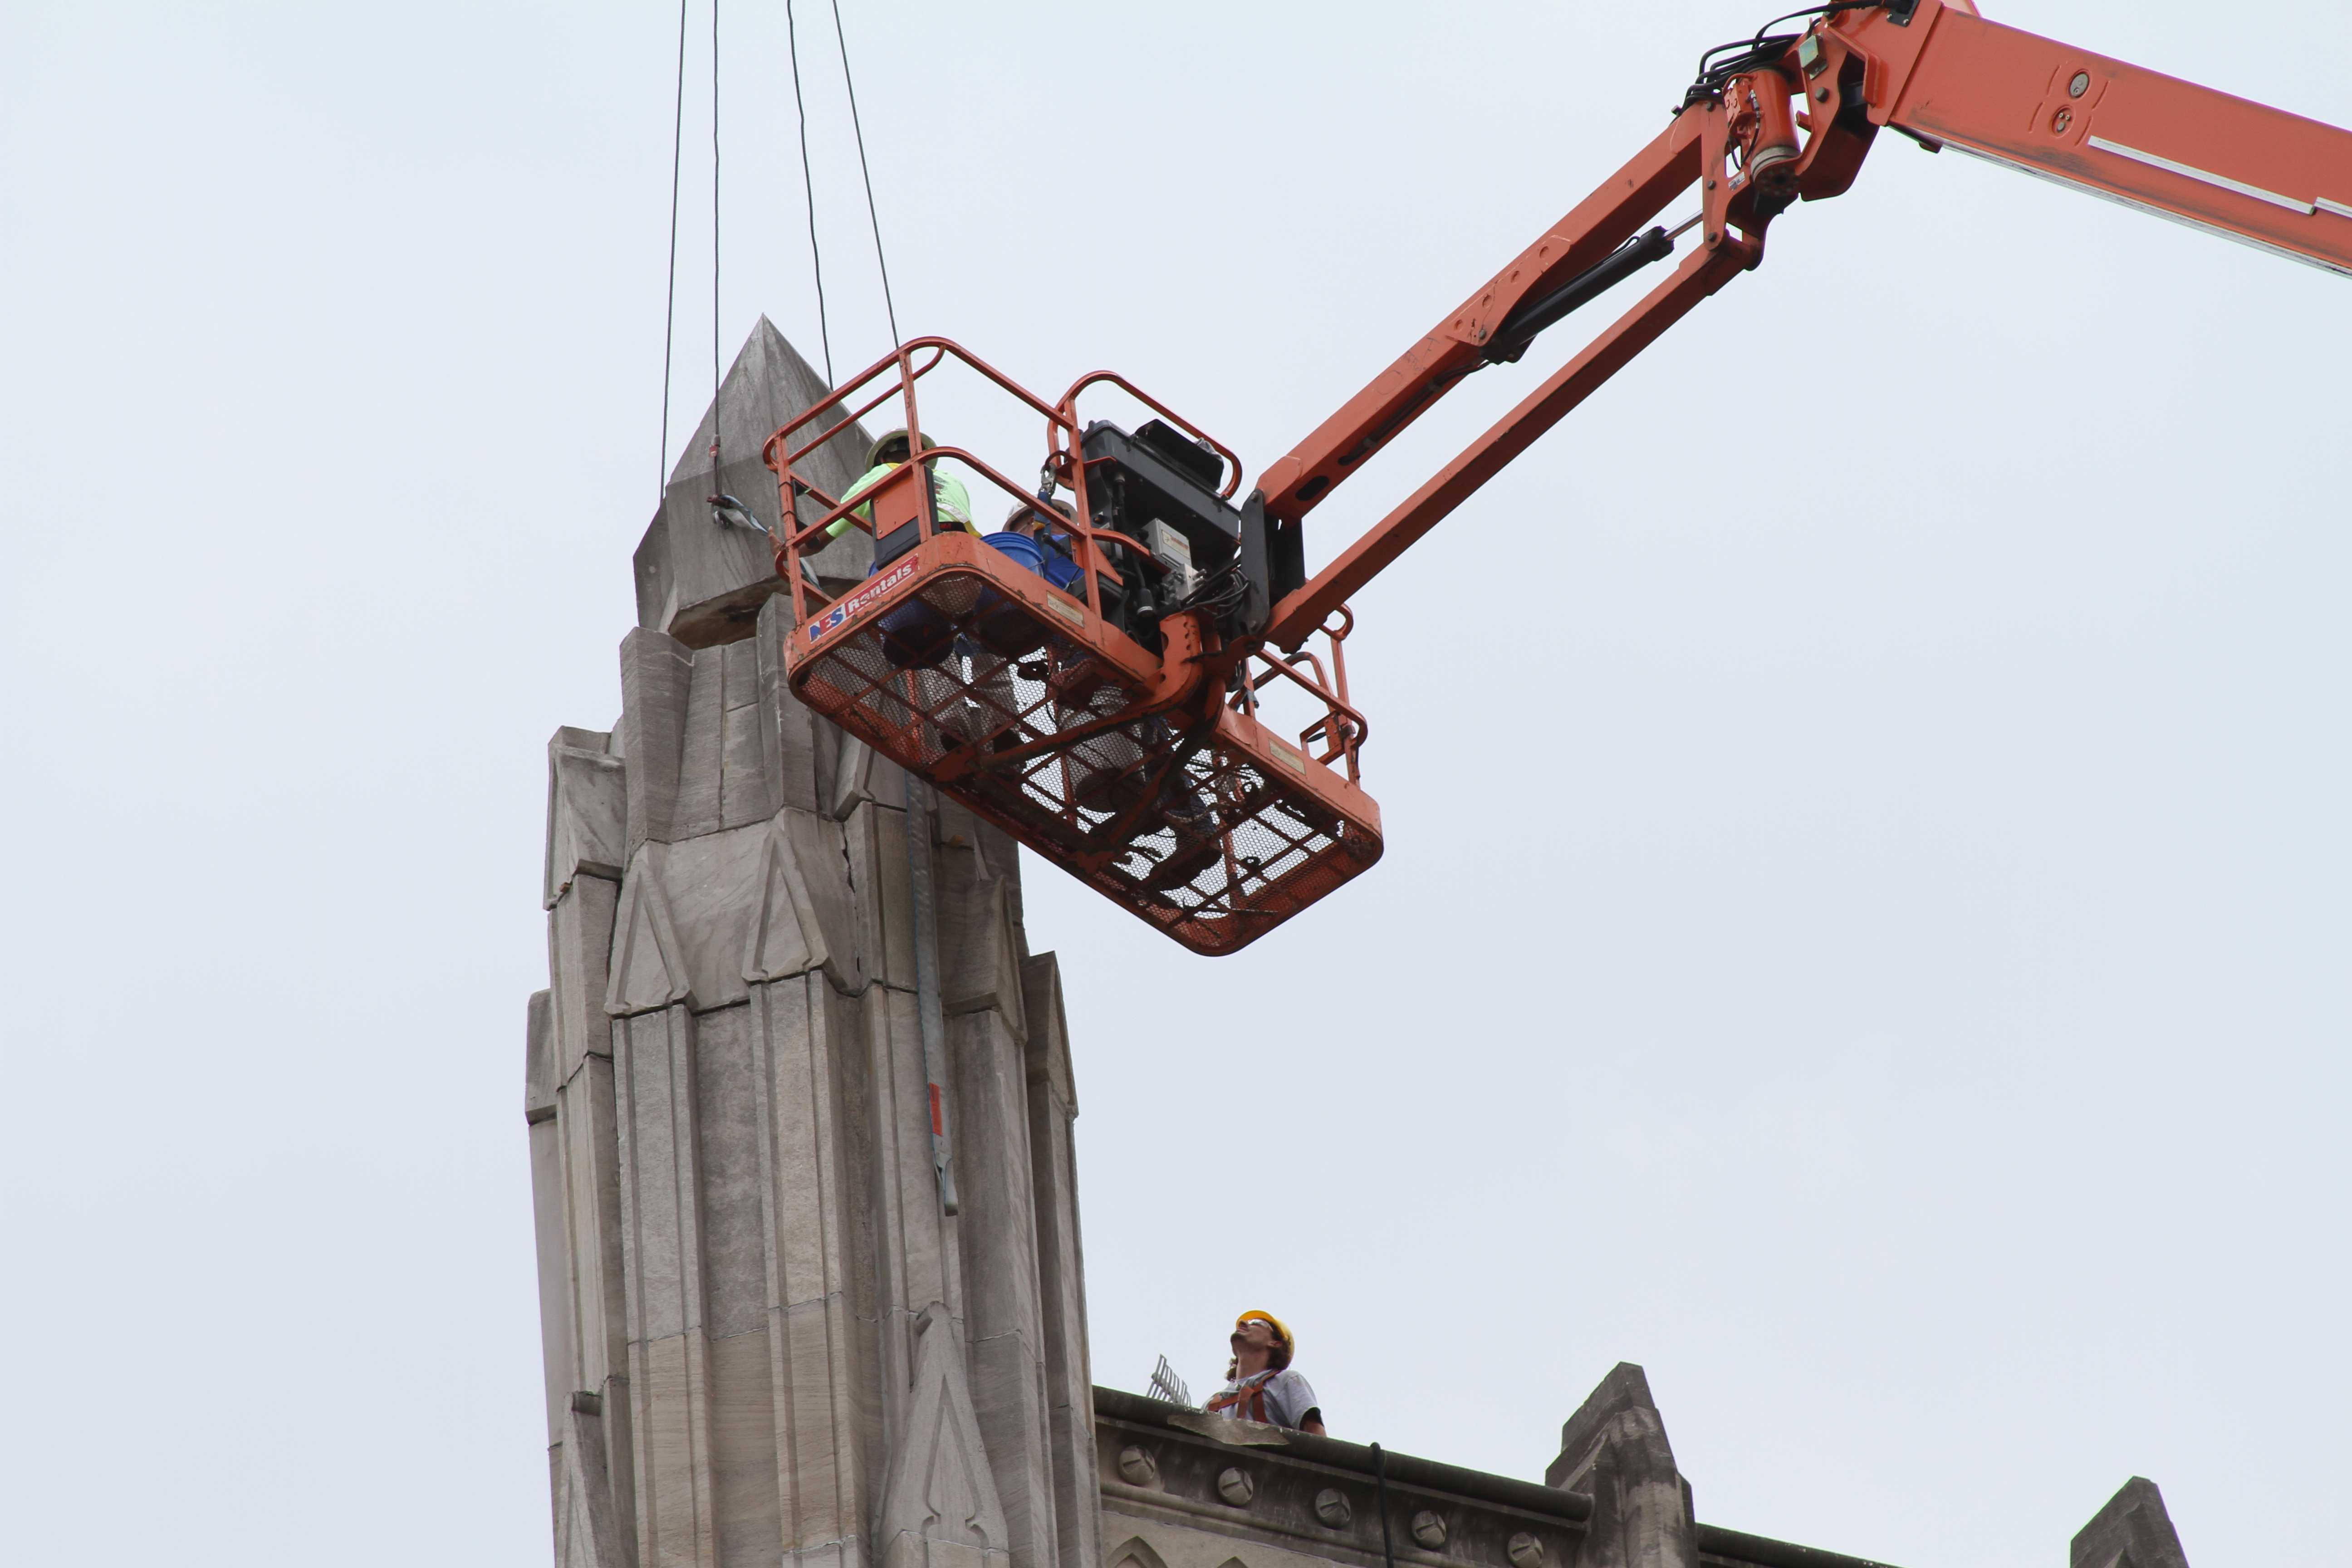 Contractors replace the center stone of Manuals iconic tower